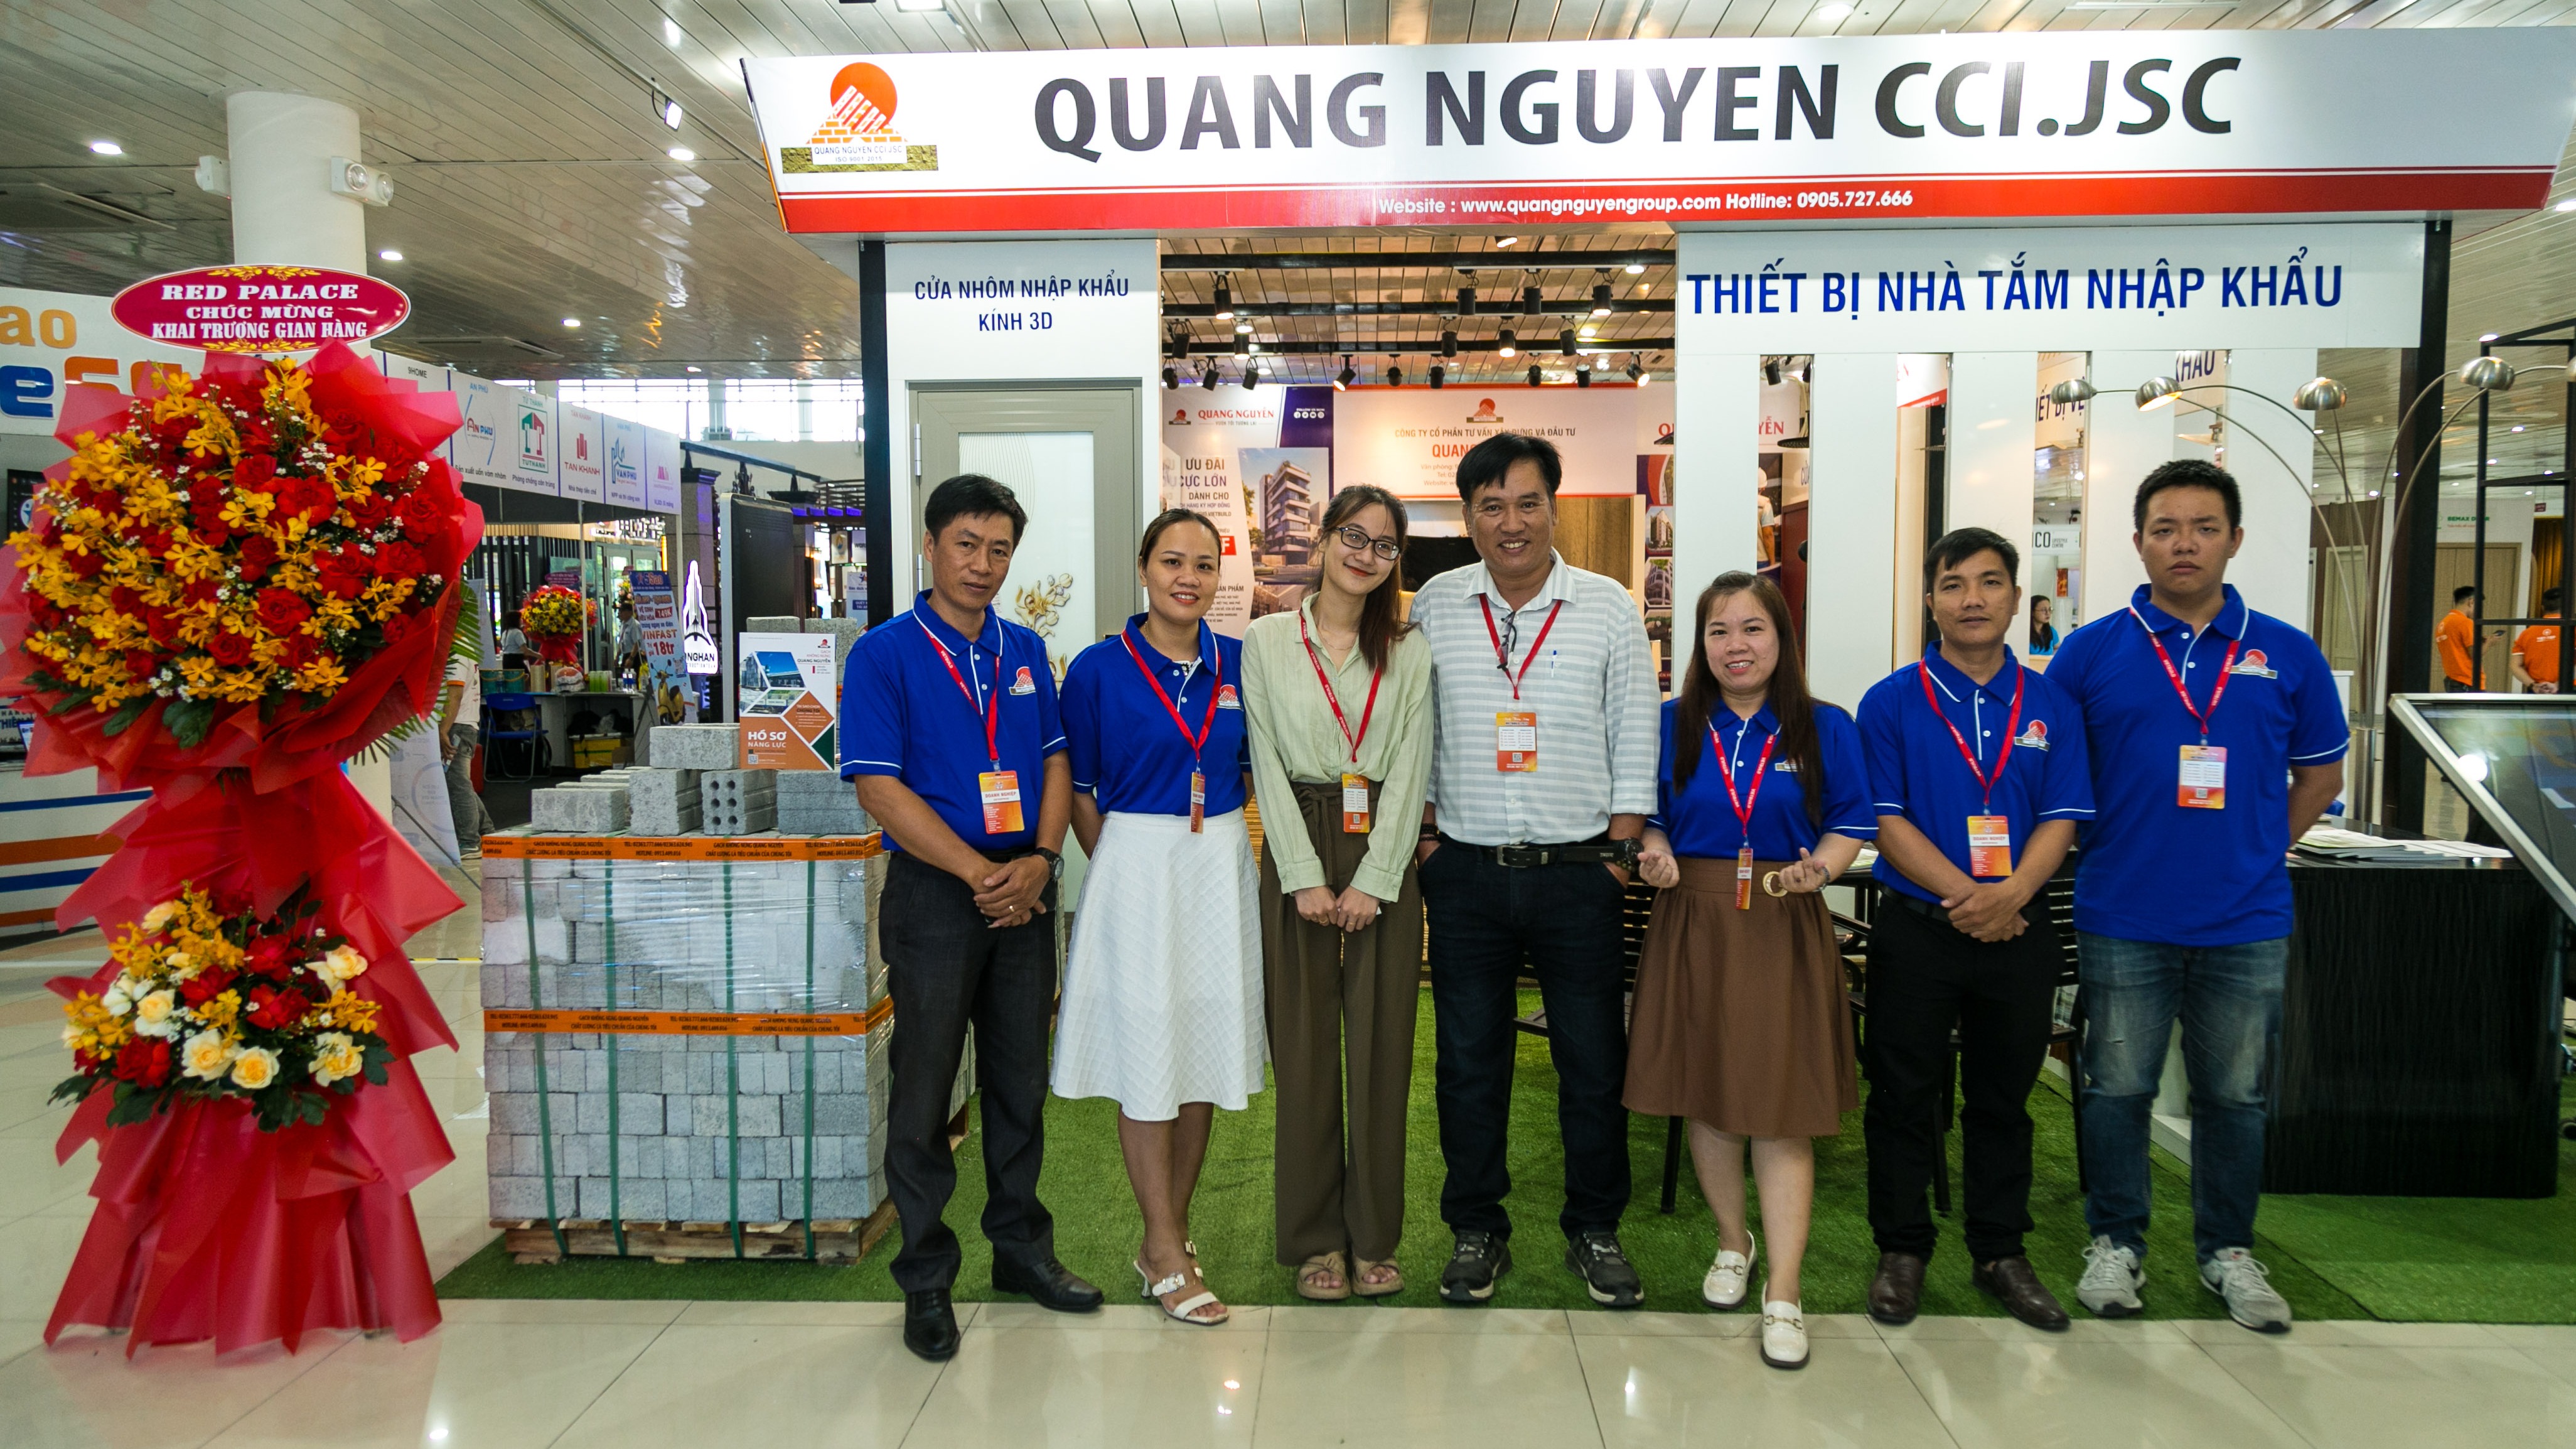 QUANG NGUYEN CONSULTANCY CONSTRUCTION INVESTMENT JOINT STOCK COMPANY